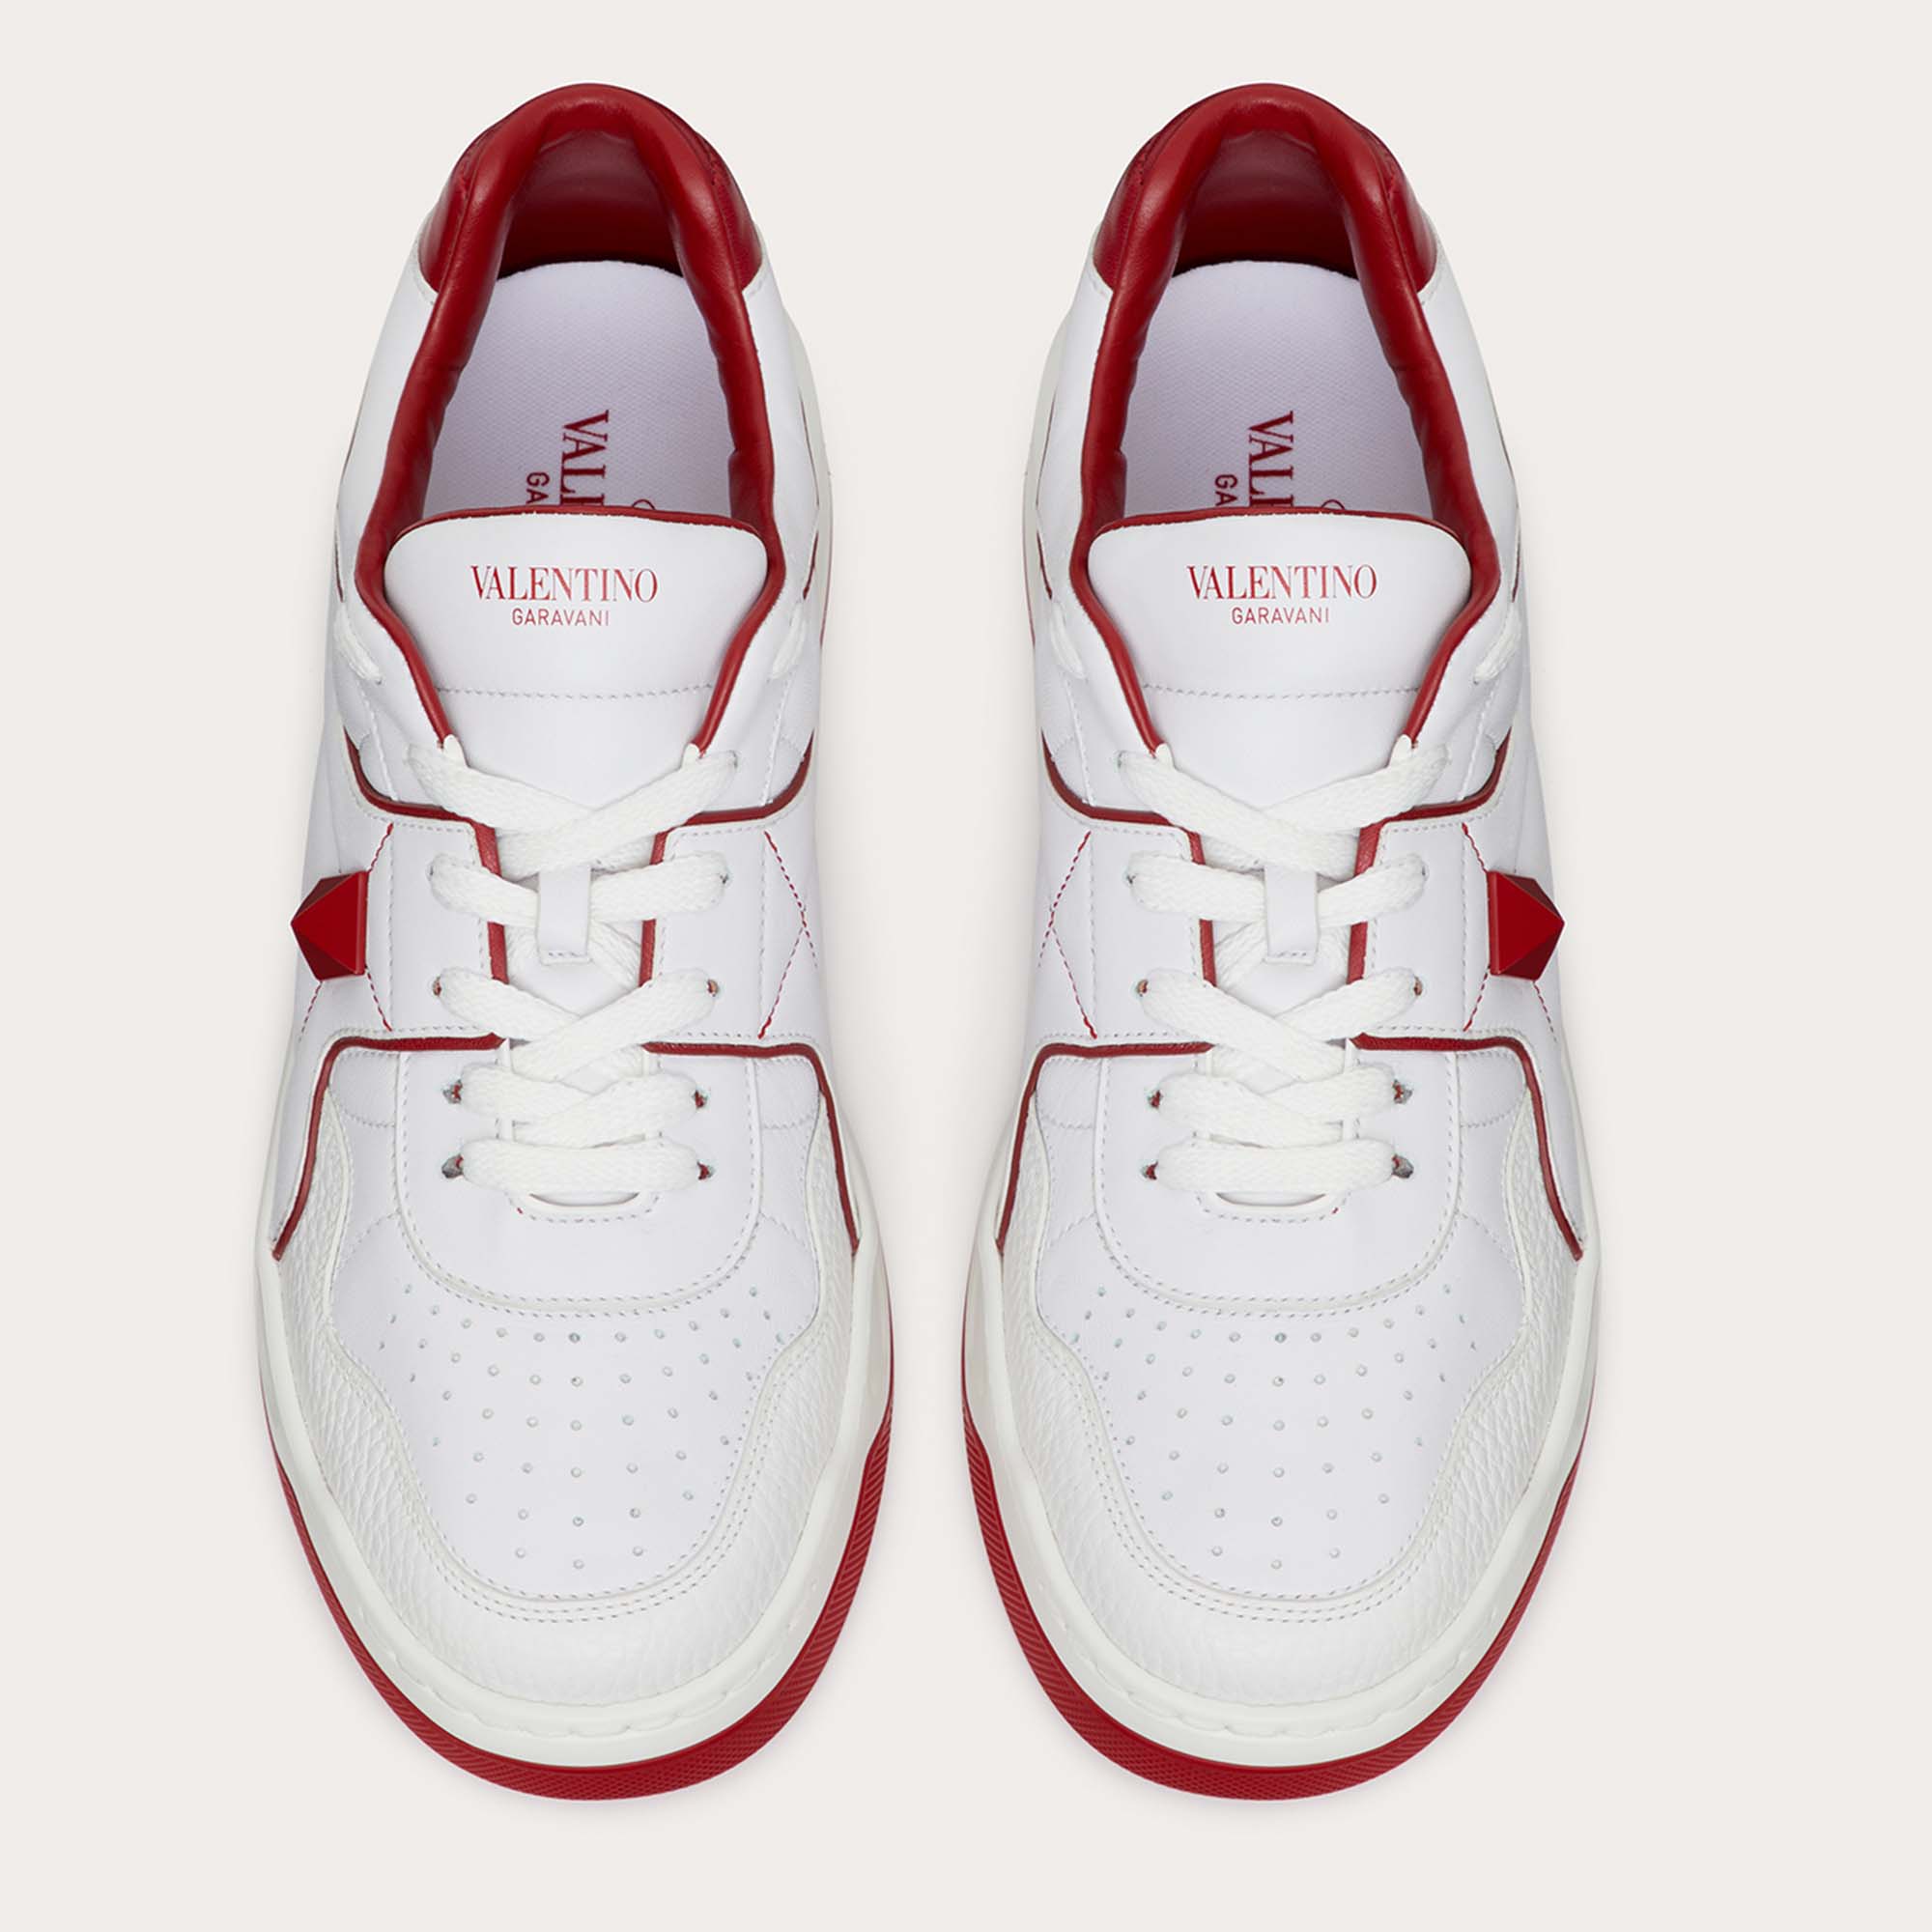 

Valentino White/Red Leather One Stud Low-Top Sneaker Size